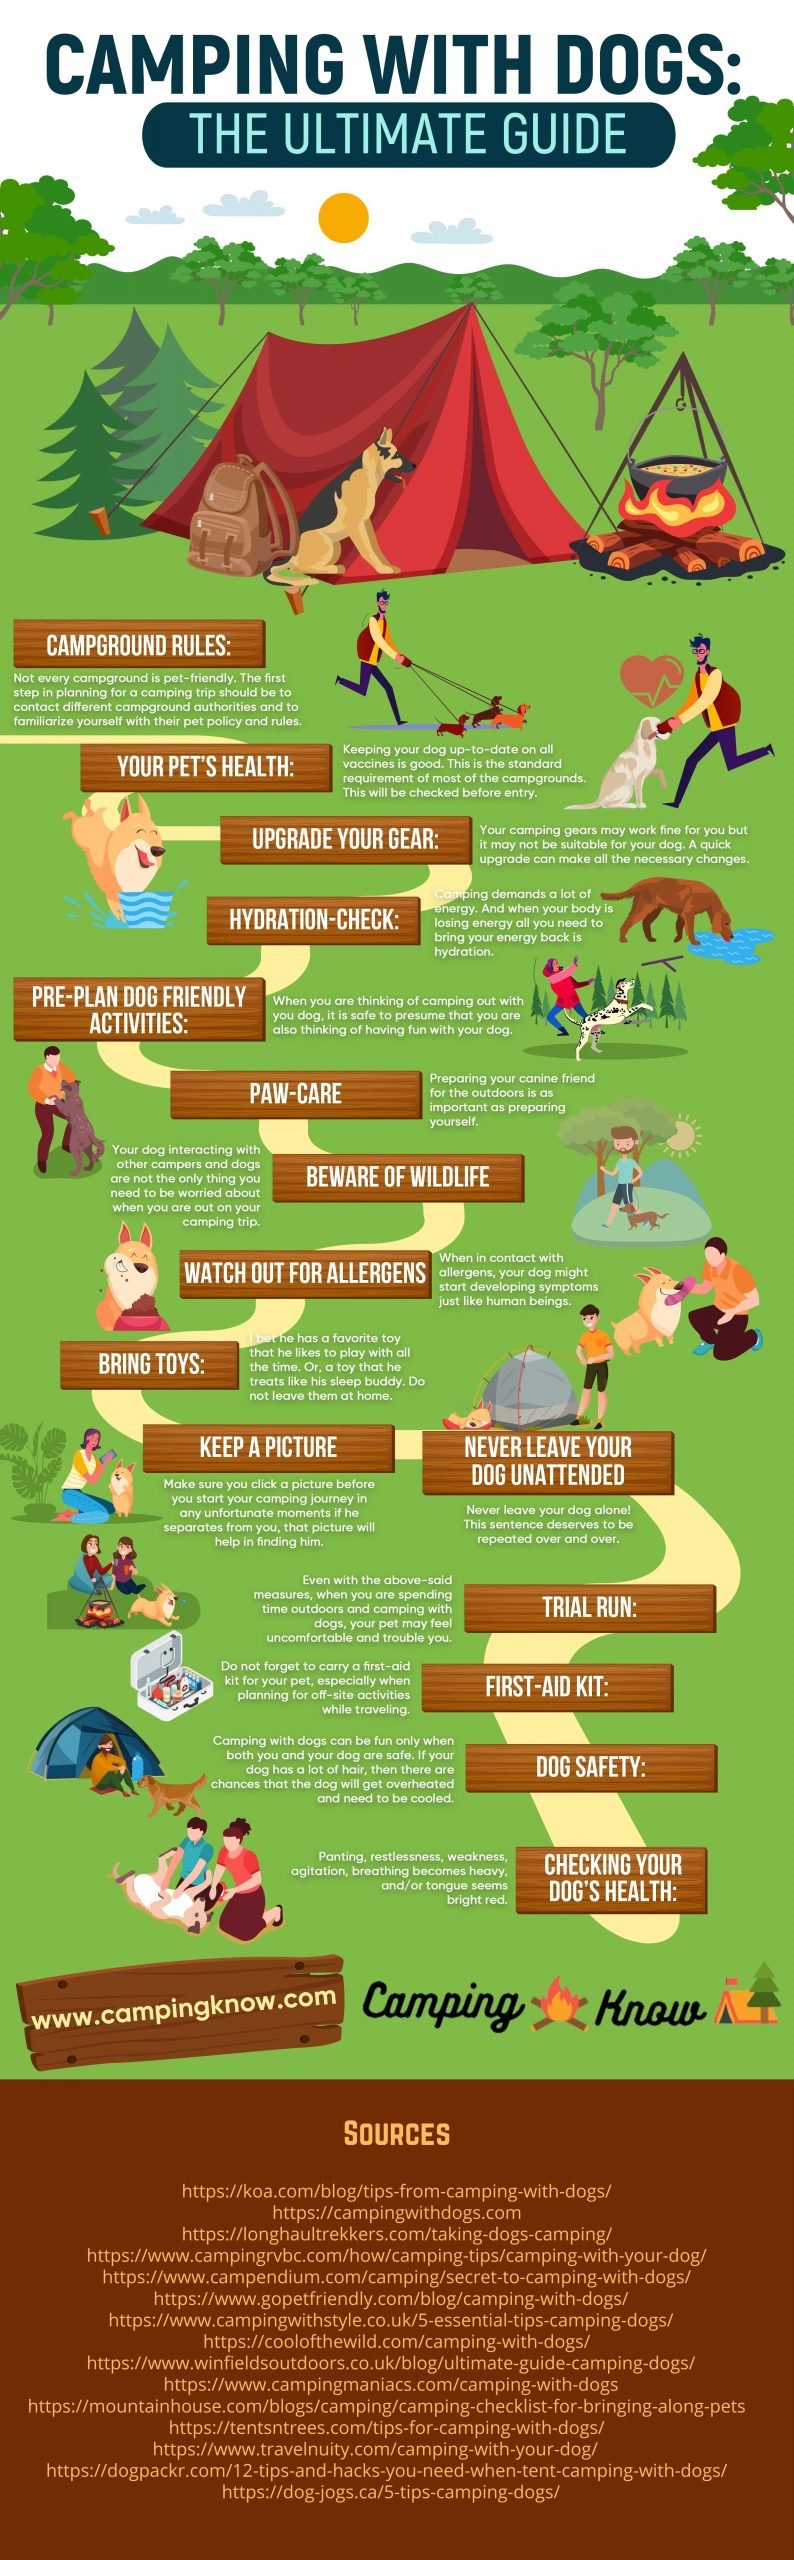 Camping With Dogs Infographic